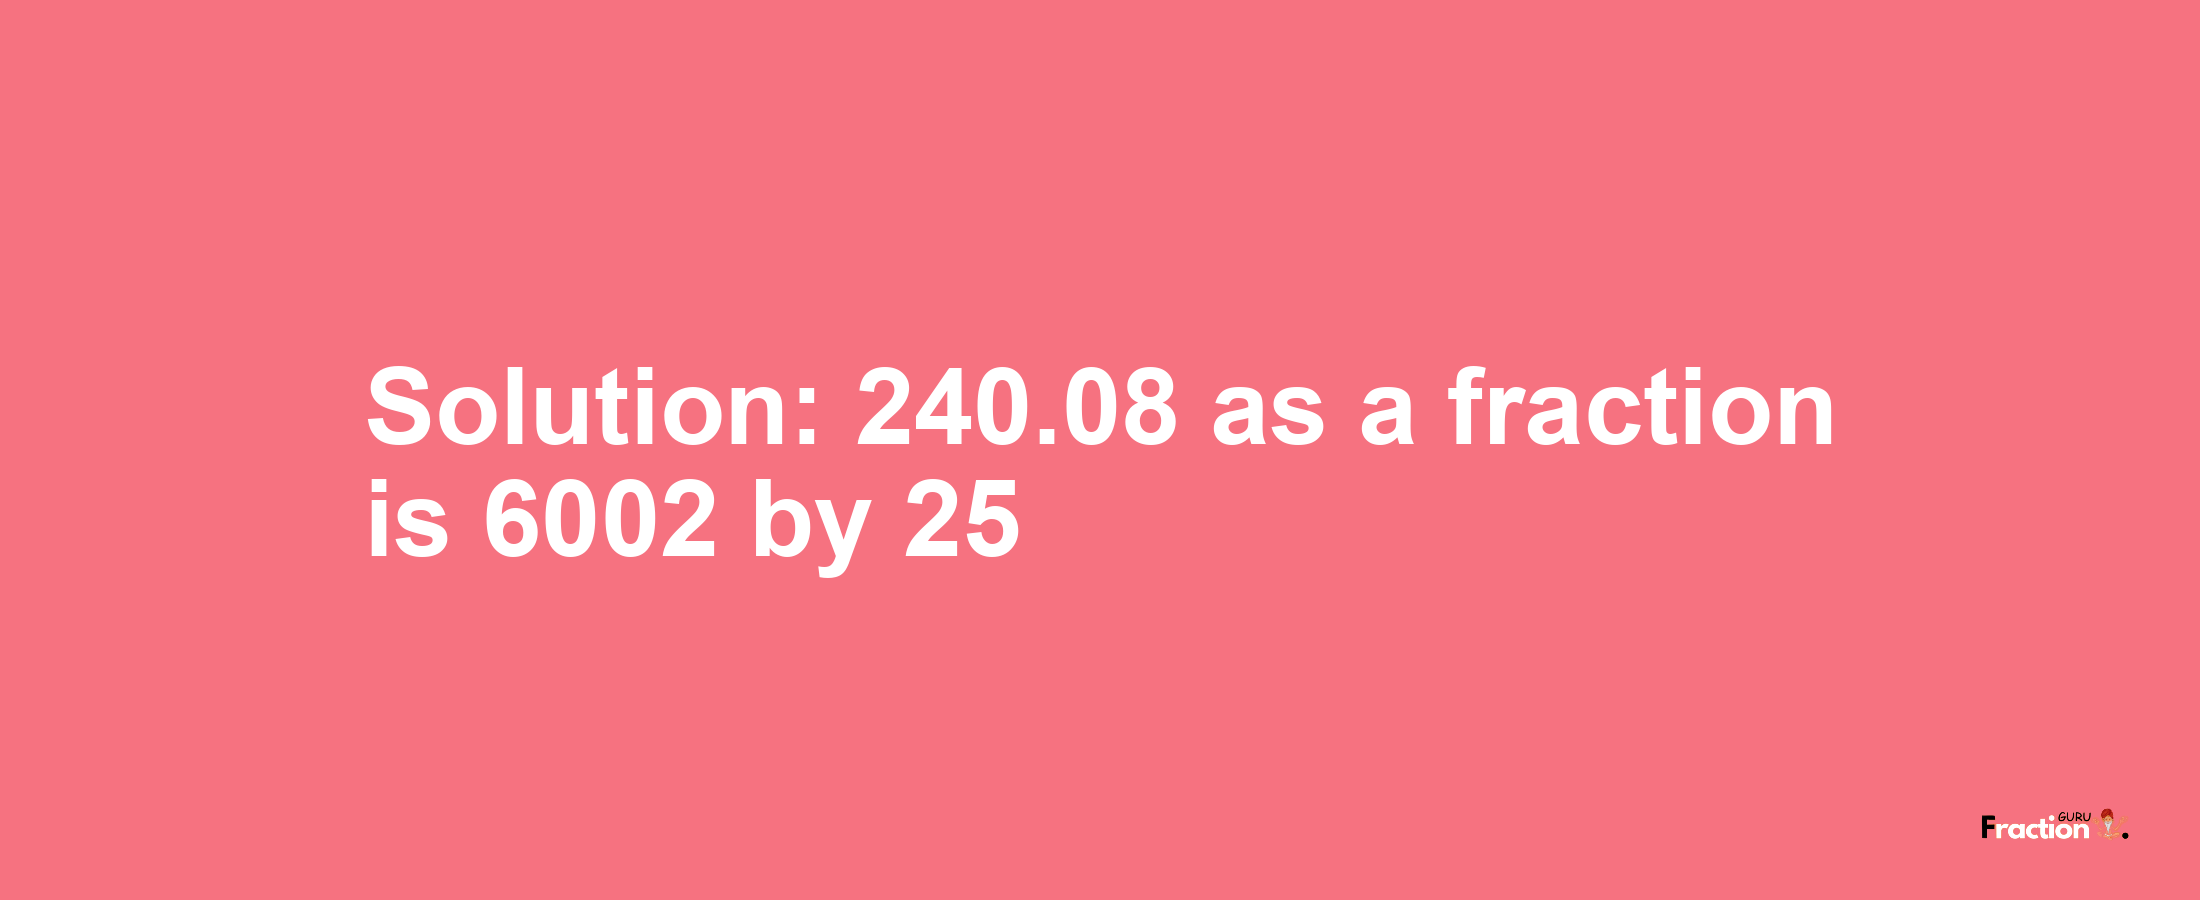 Solution:240.08 as a fraction is 6002/25